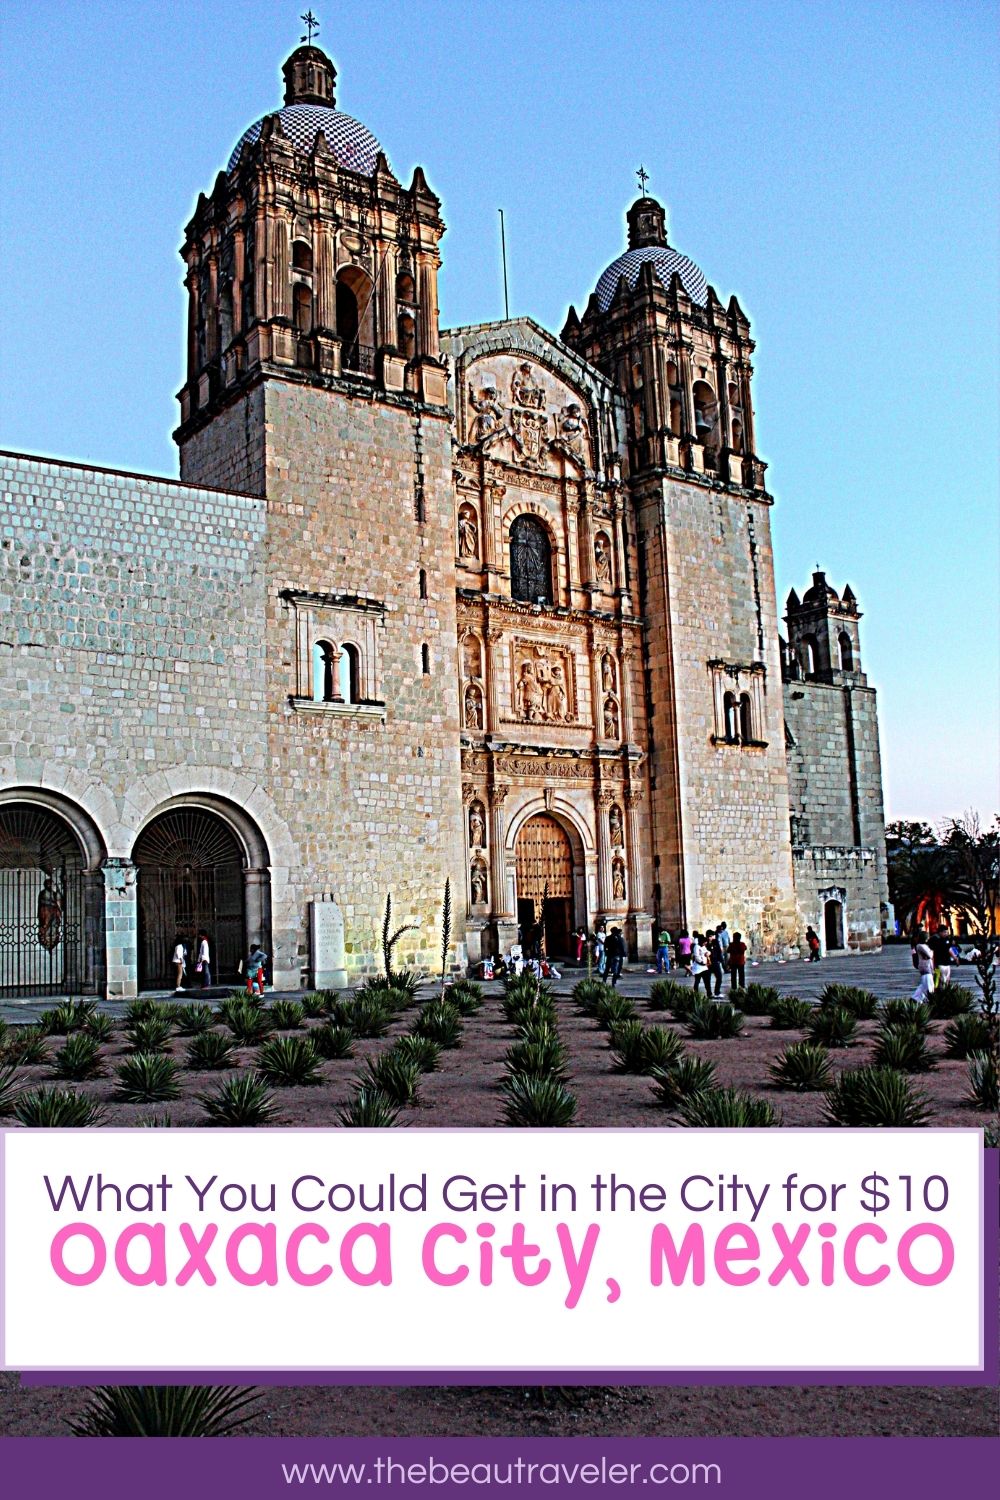 What You Could Get in Oaxaca City for $10 - The BeauTraveler